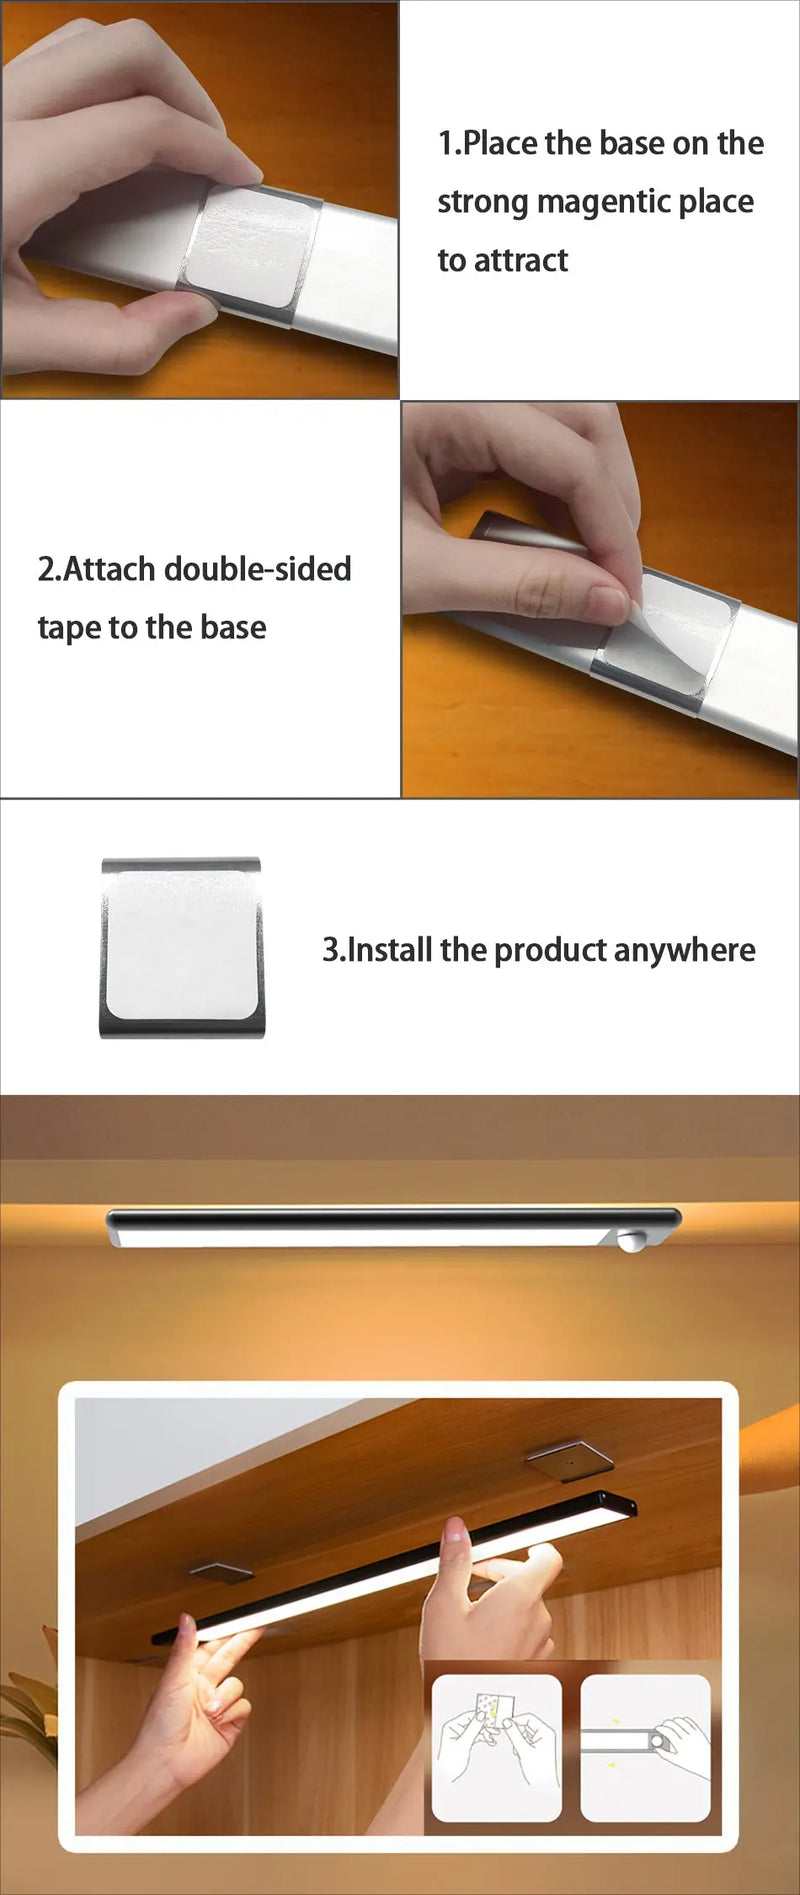 https://yeechop.com/products/ultra-thin-led-rechargeable-motion-sensor-light?_pos=1&_sid=04903bea1&_ss=r